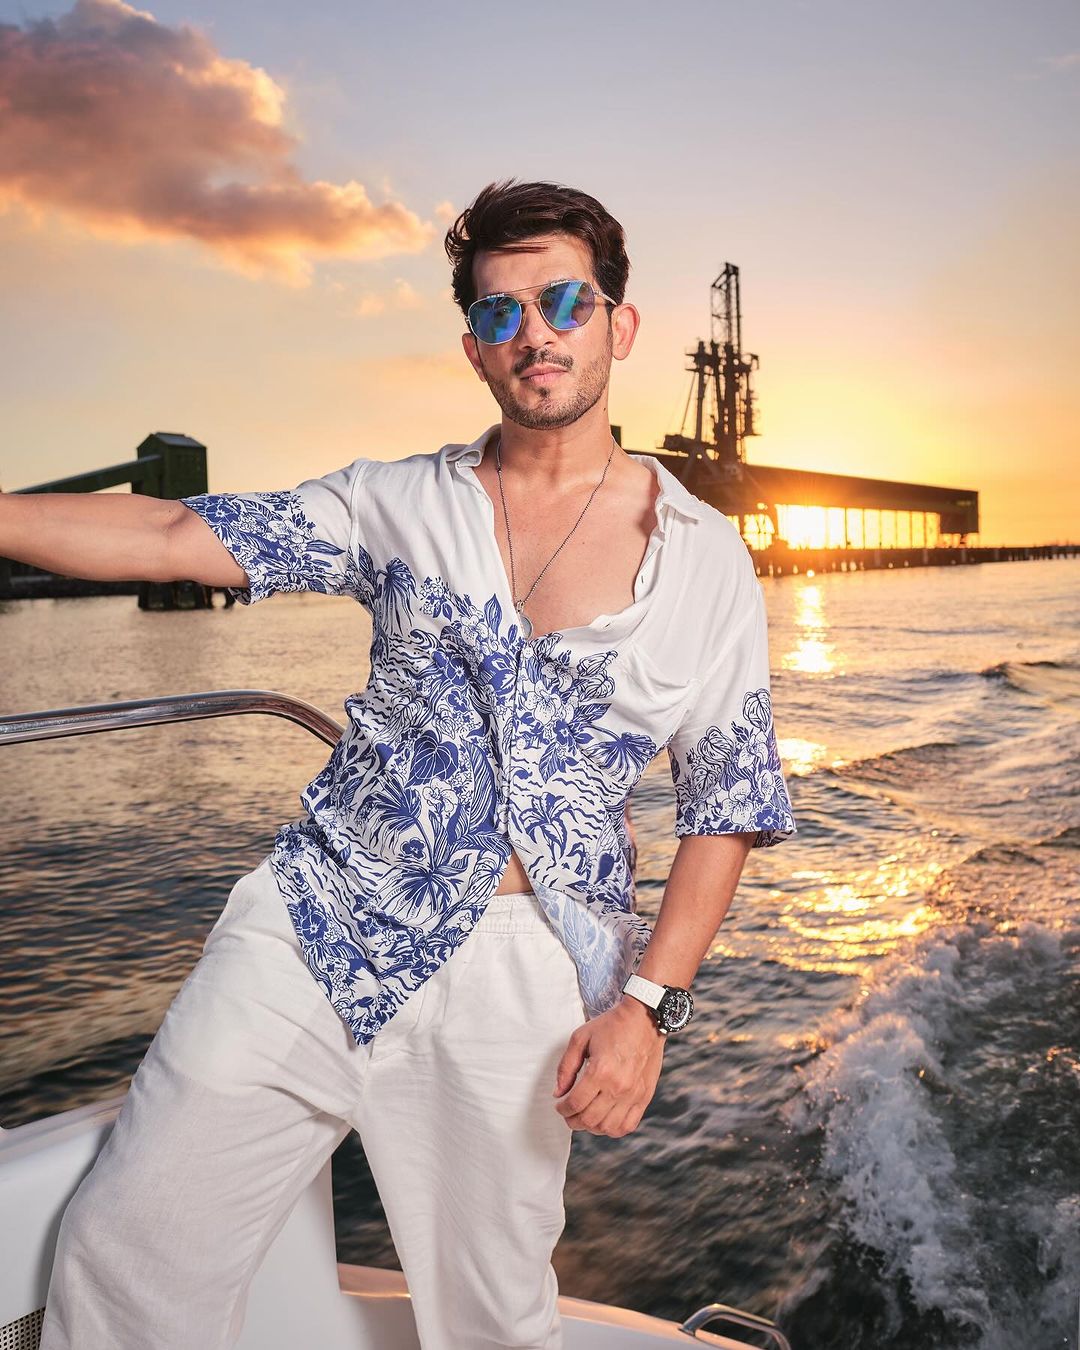 Surprising Deets Inside! Our Handsome Arjun Bijlani Is All Set To Appear In A New Reality Show!